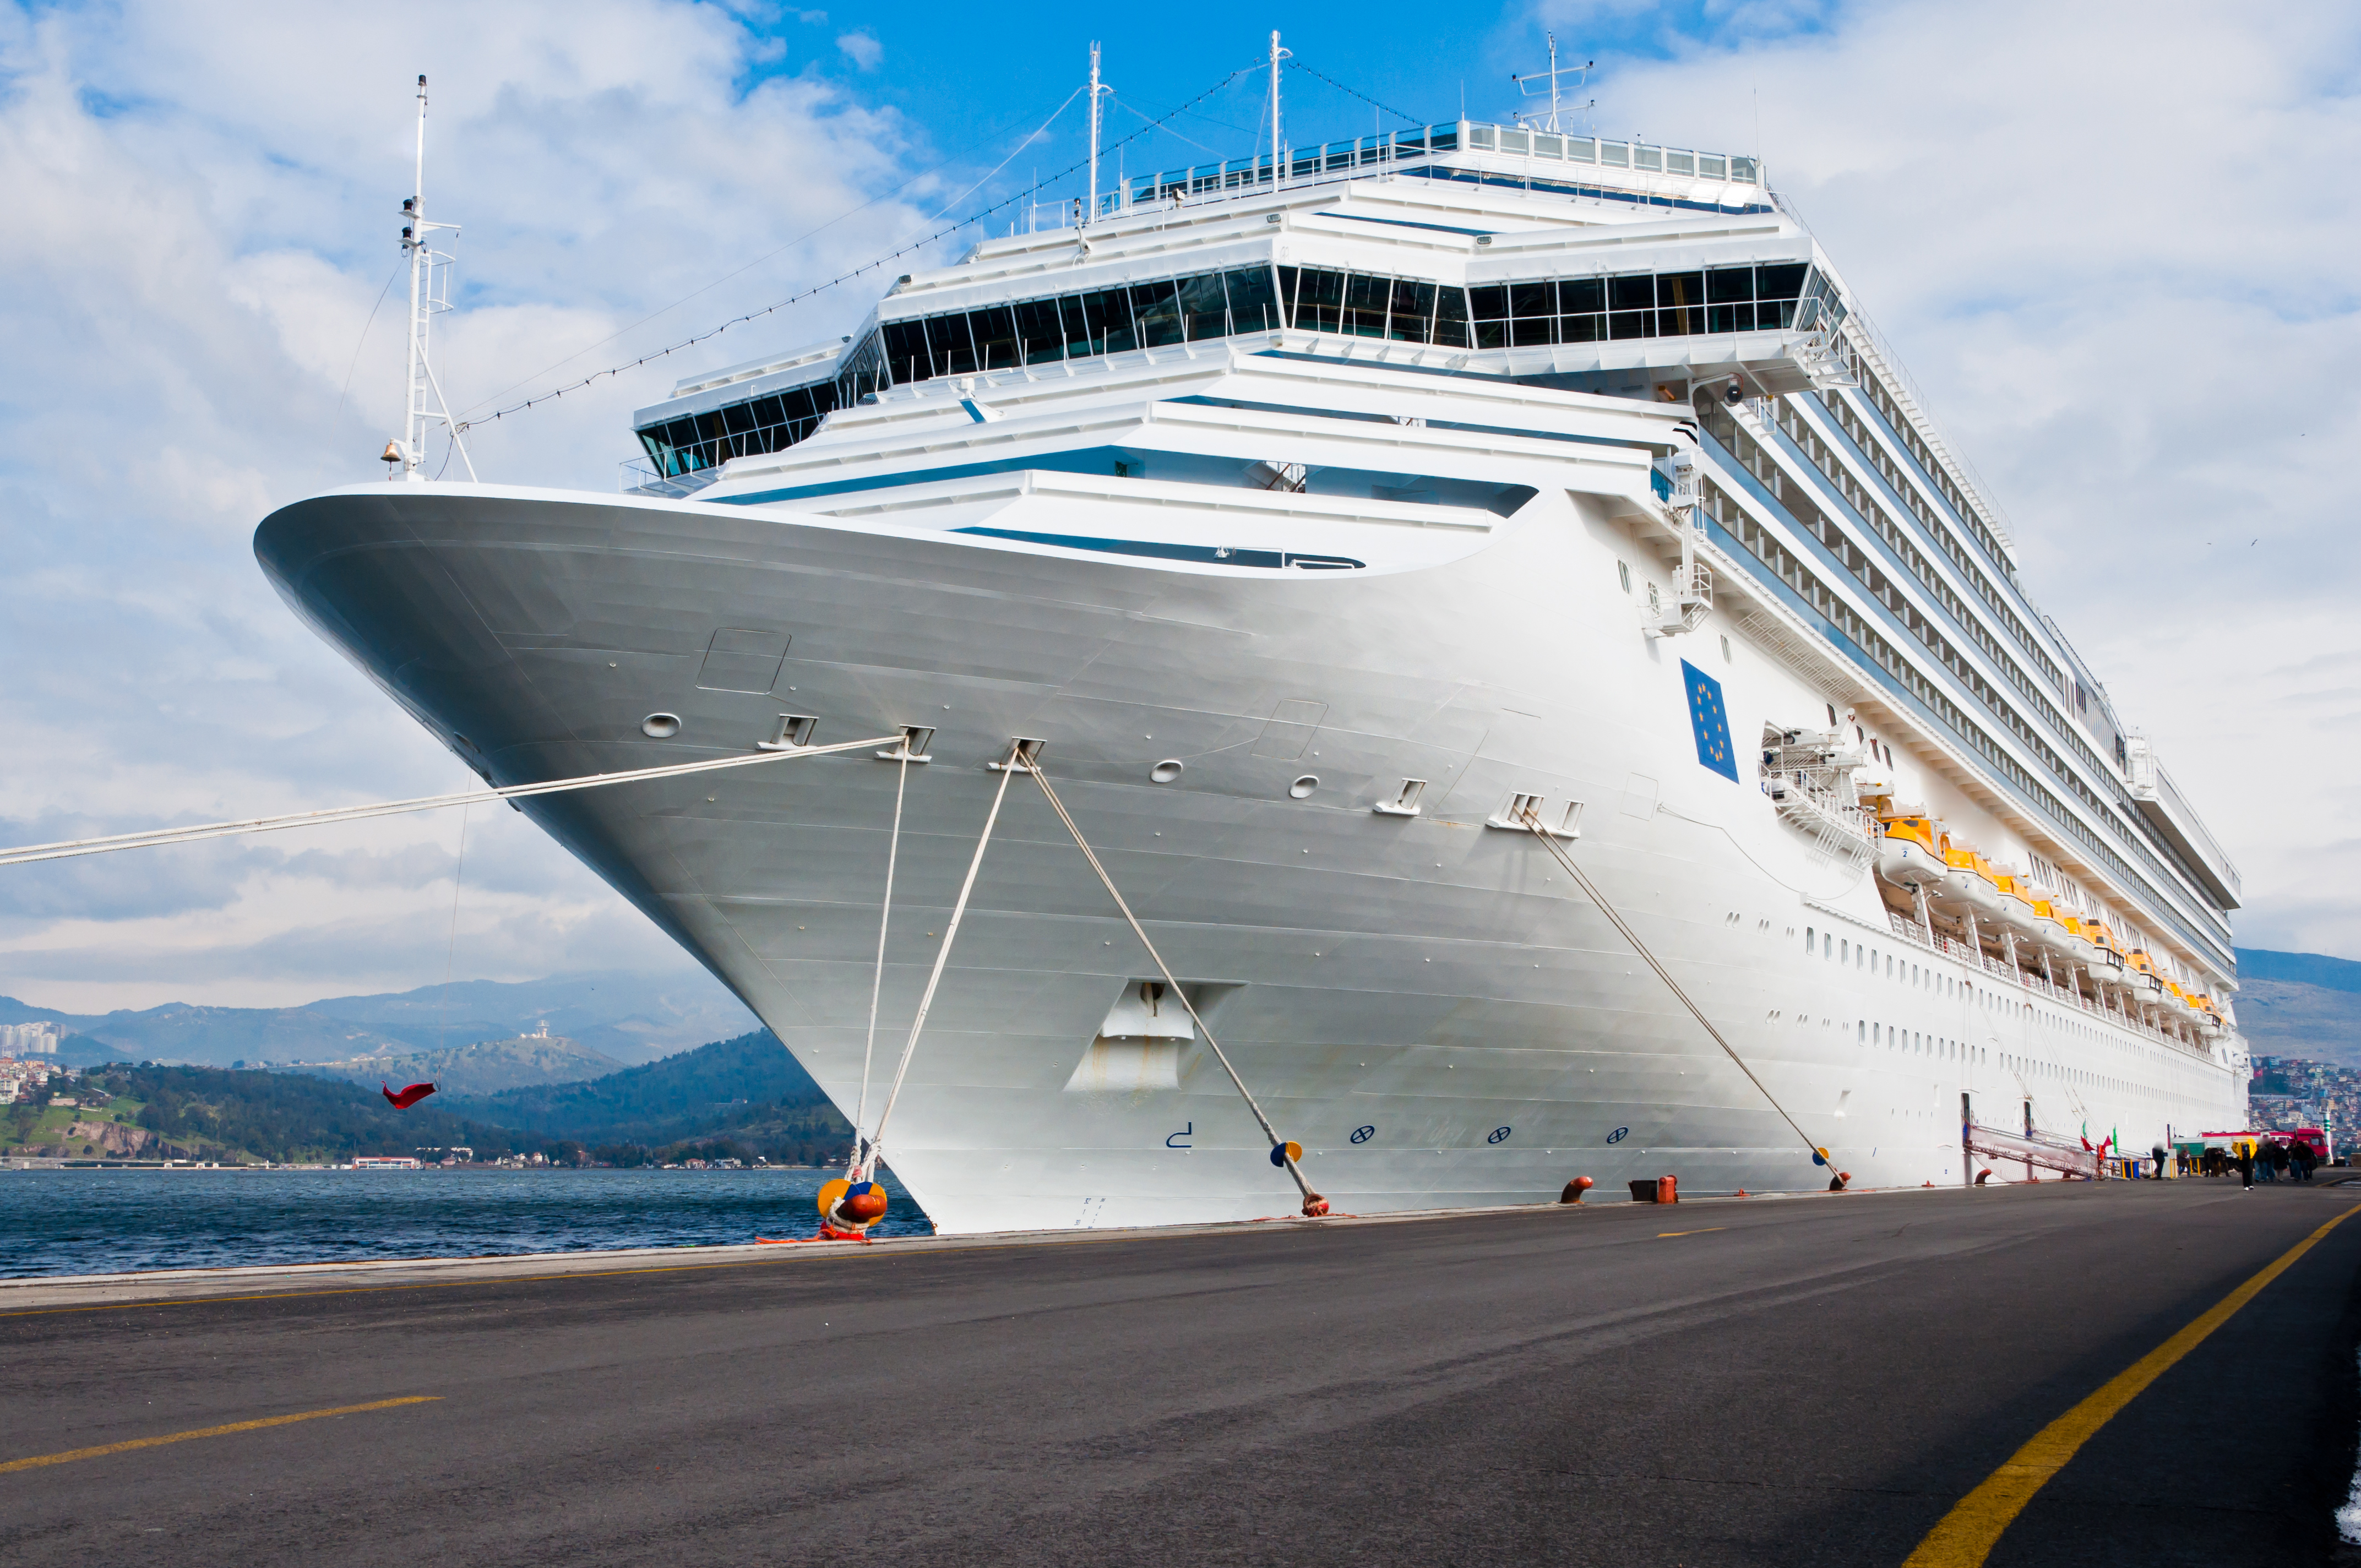 Registration of Persons on Passenger Ships (Directive)